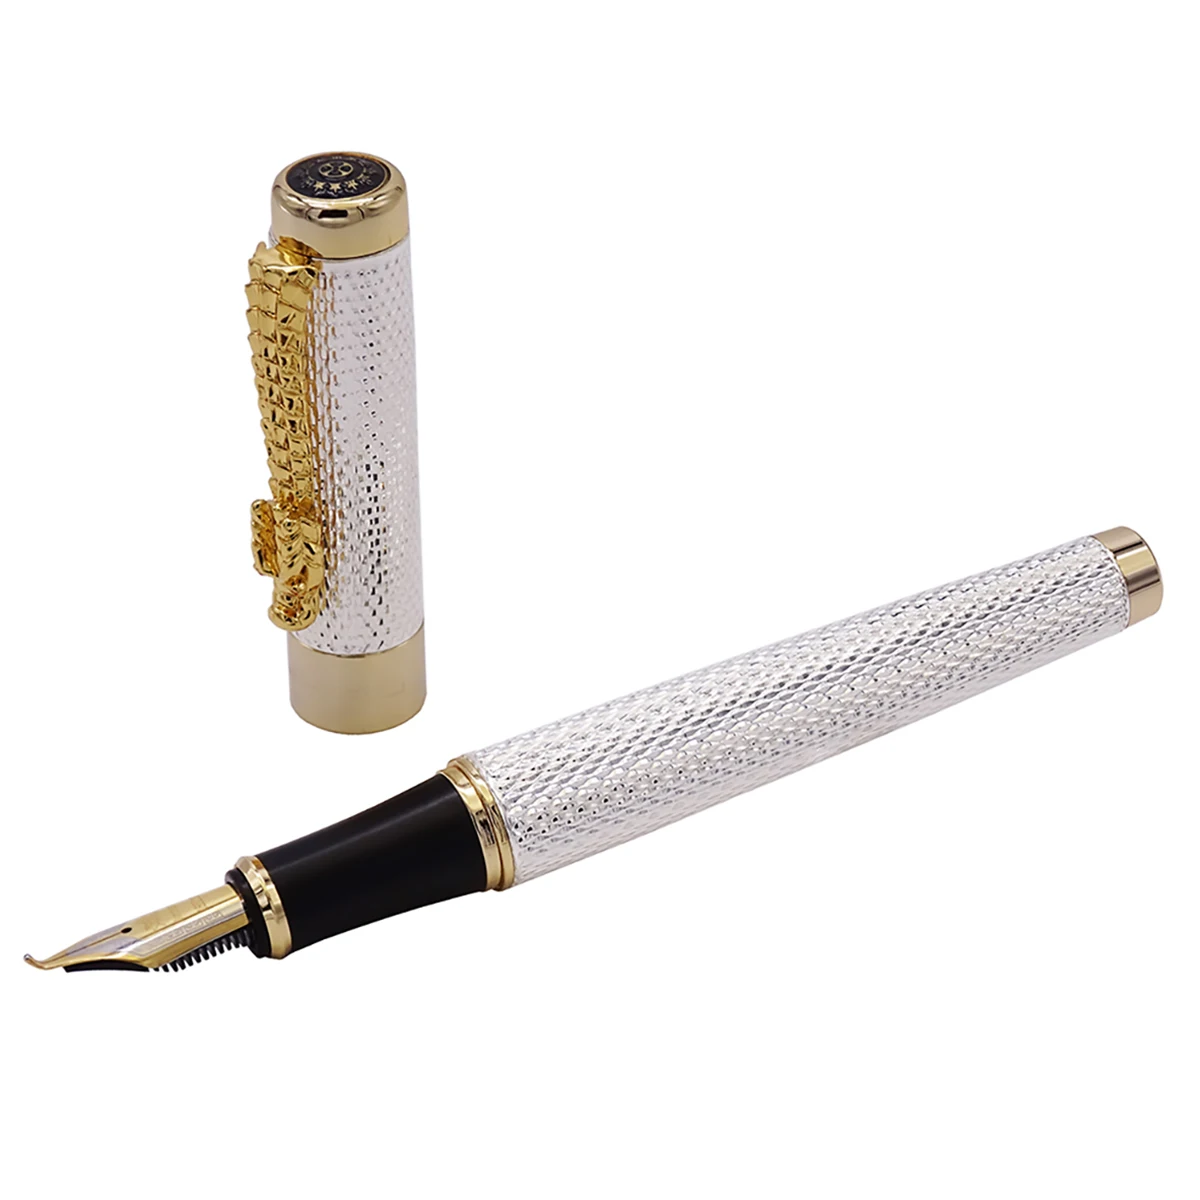 

Jinhao 1200 Vintage Luxurious Calligraphy Fountain Pen Bent Nib Beautiful Ripple with Dragon Clip, Silver Metal Carving Ink Pen